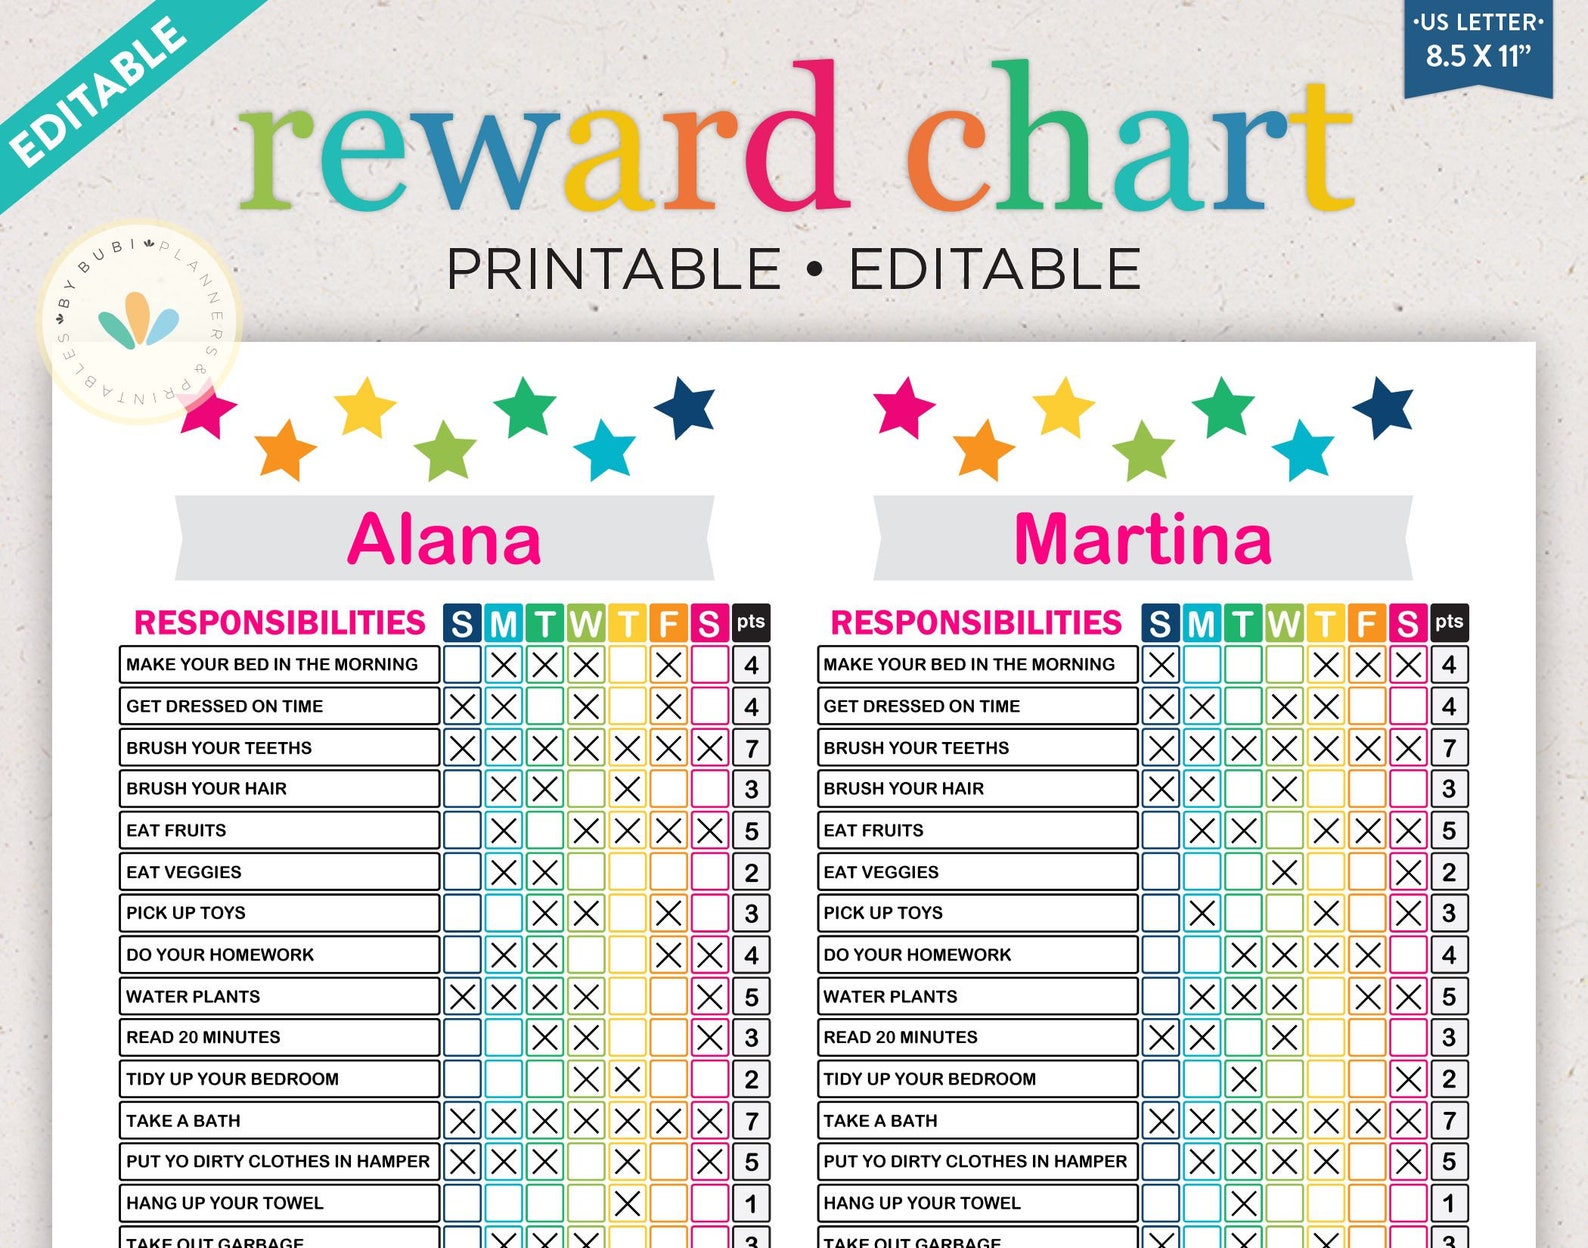 Reward Chart For 2 Kids Kids Chore Chart Chore Chart With Points